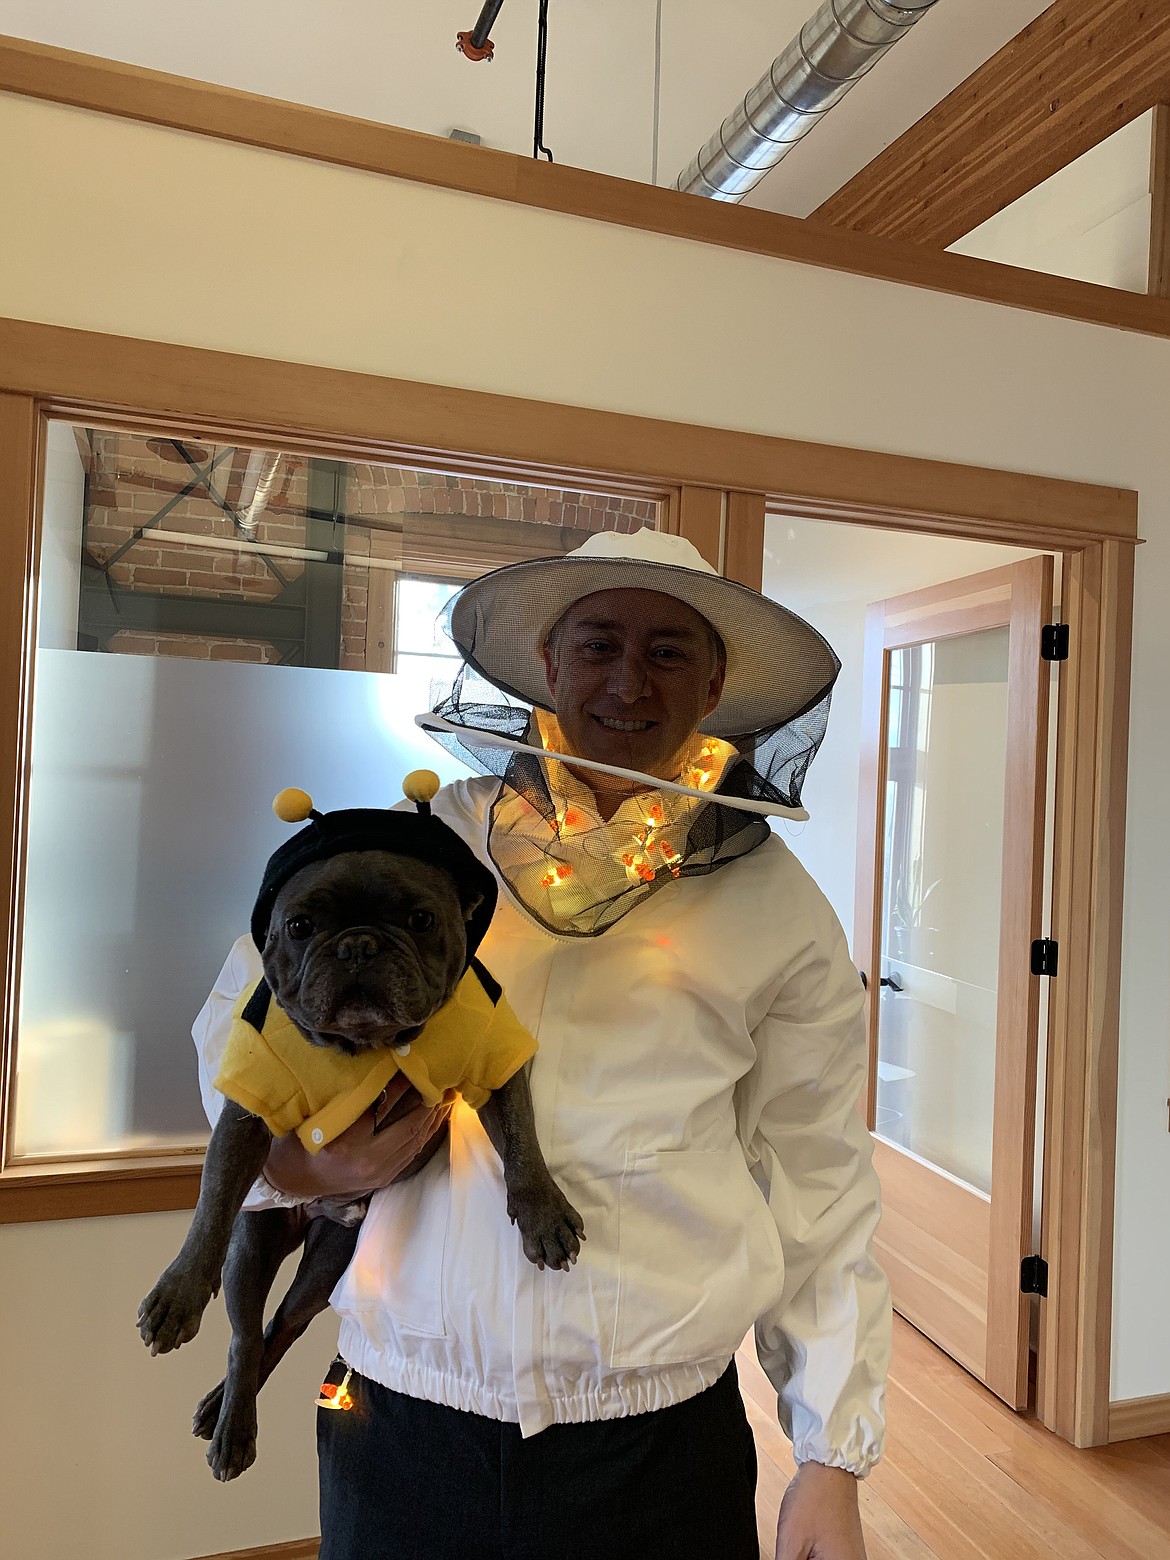 Stephen Snedden and Tucker of Snedden Law, P.C. testing out their costumes. "They are obviously excited for Halloween," writes Lisa Mendenhall, who submitted this Best Shot.